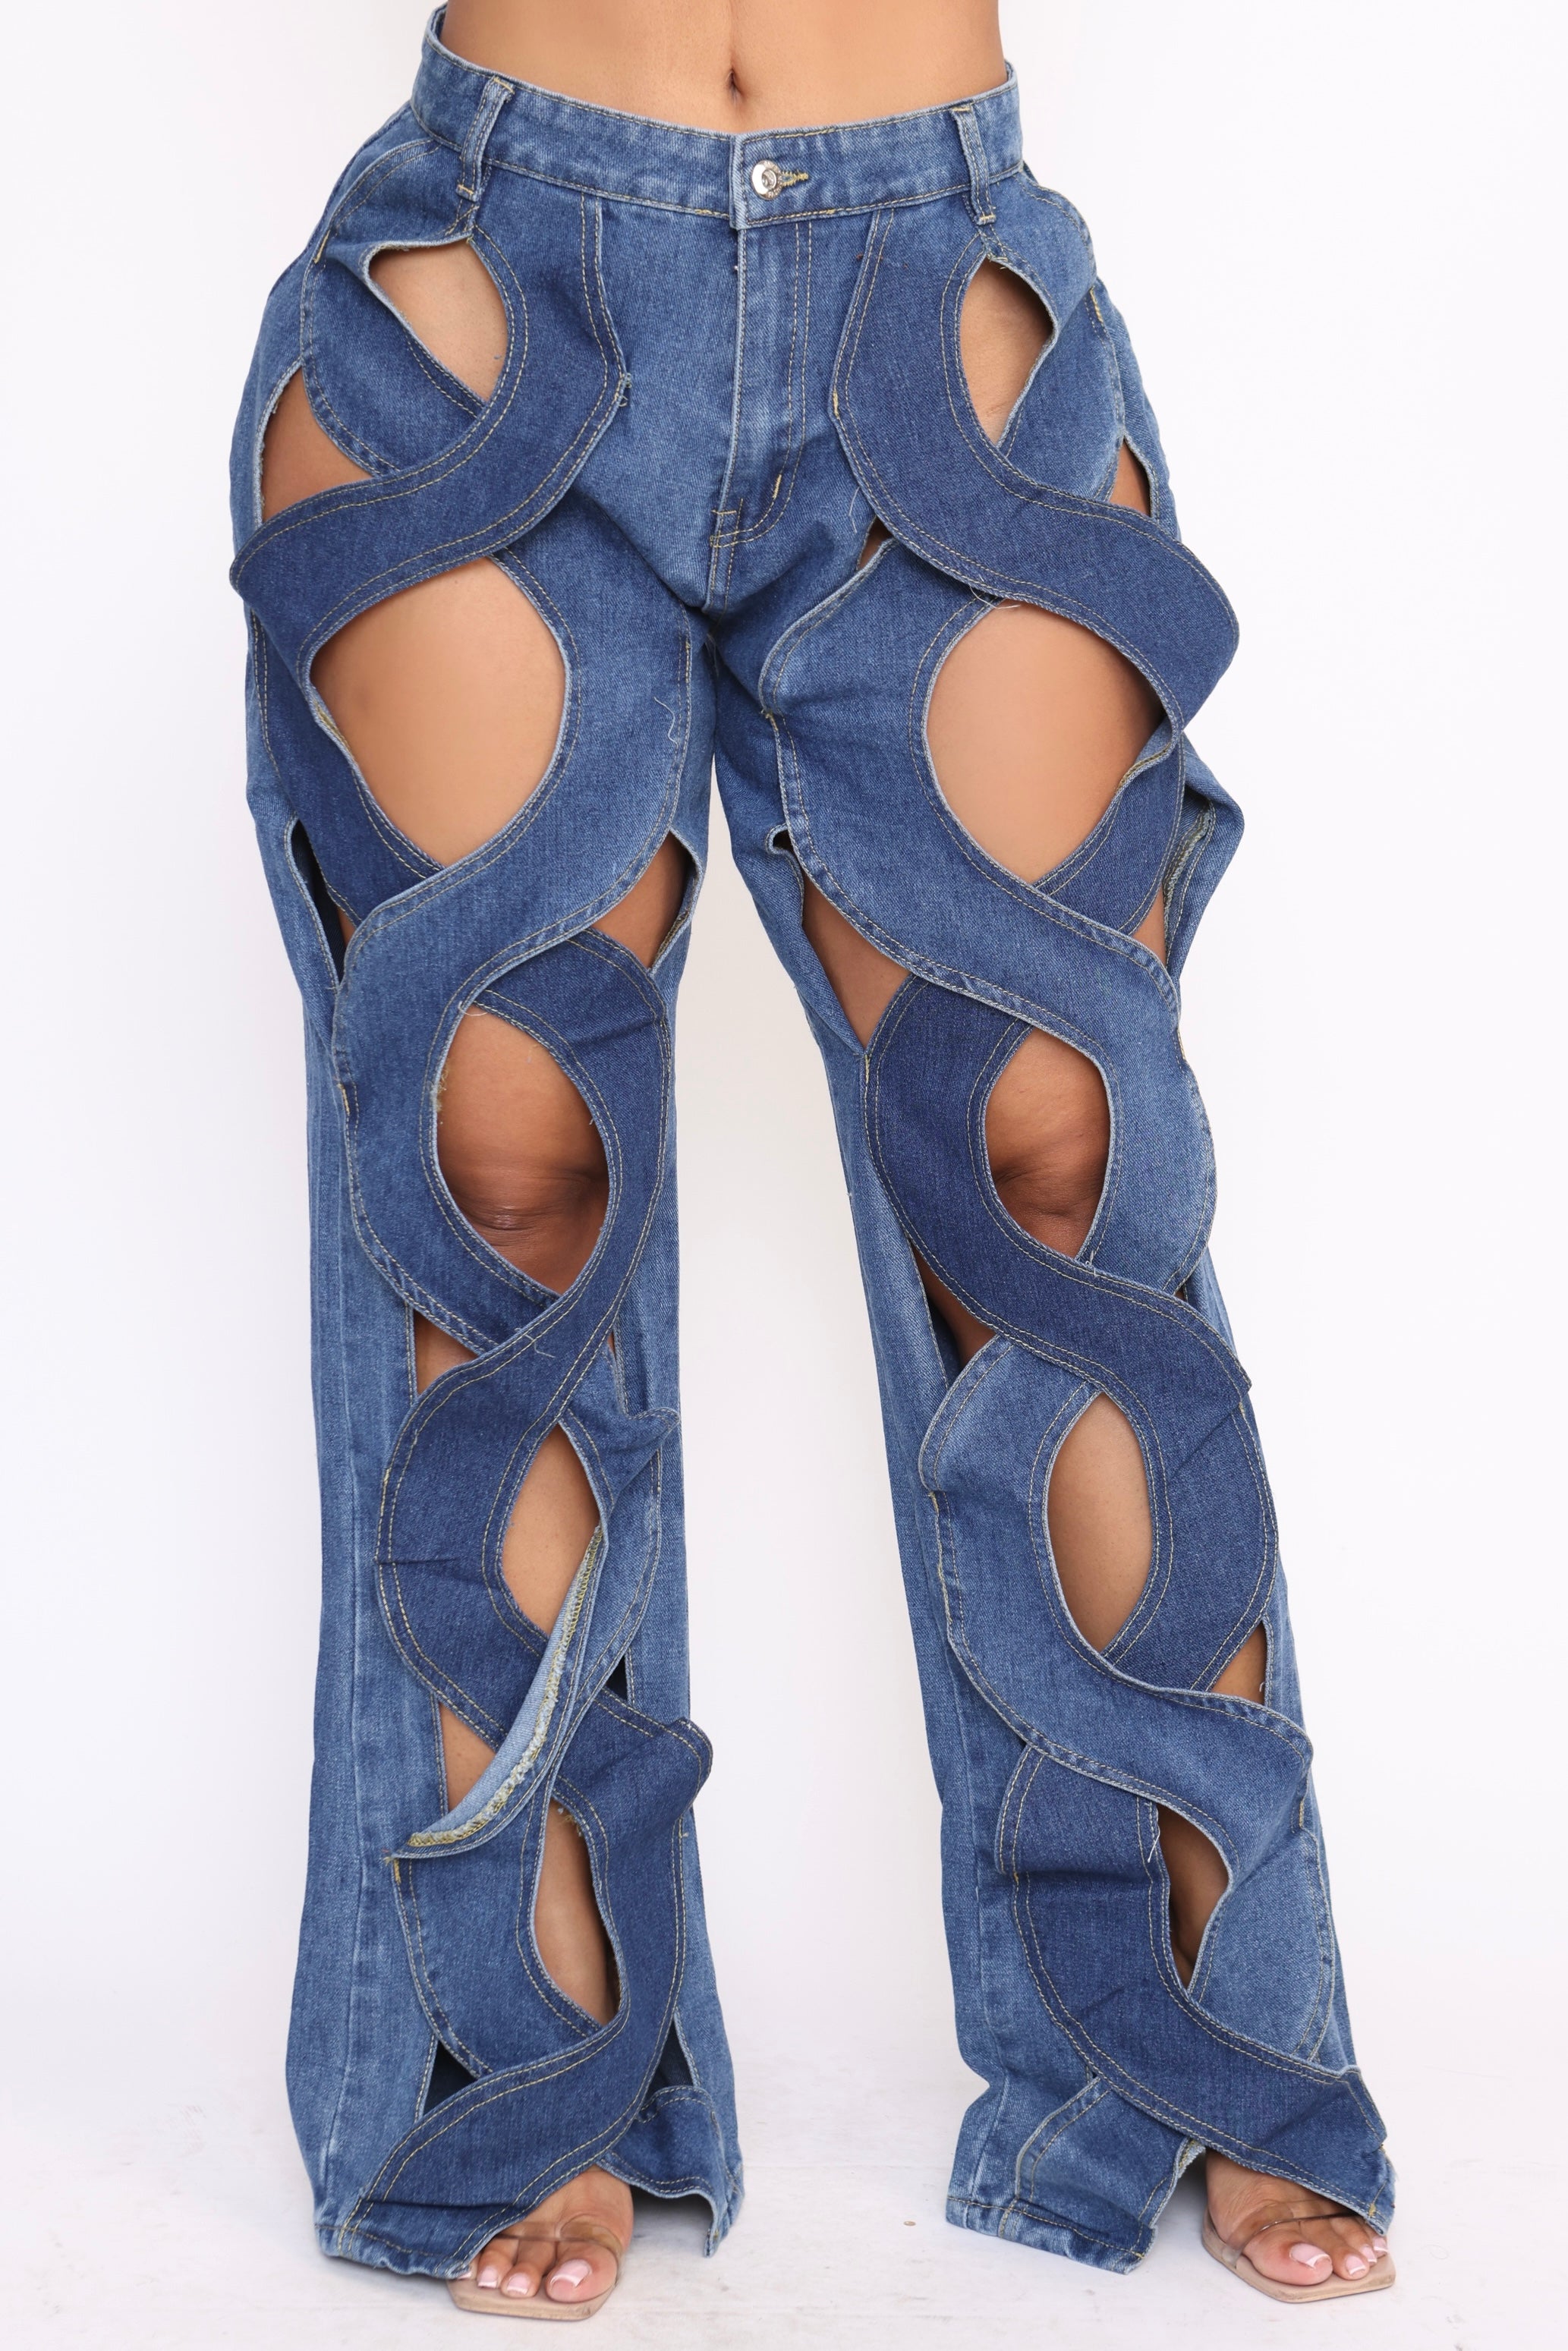 Criss Cross Jeans – Trendy and Tipsy